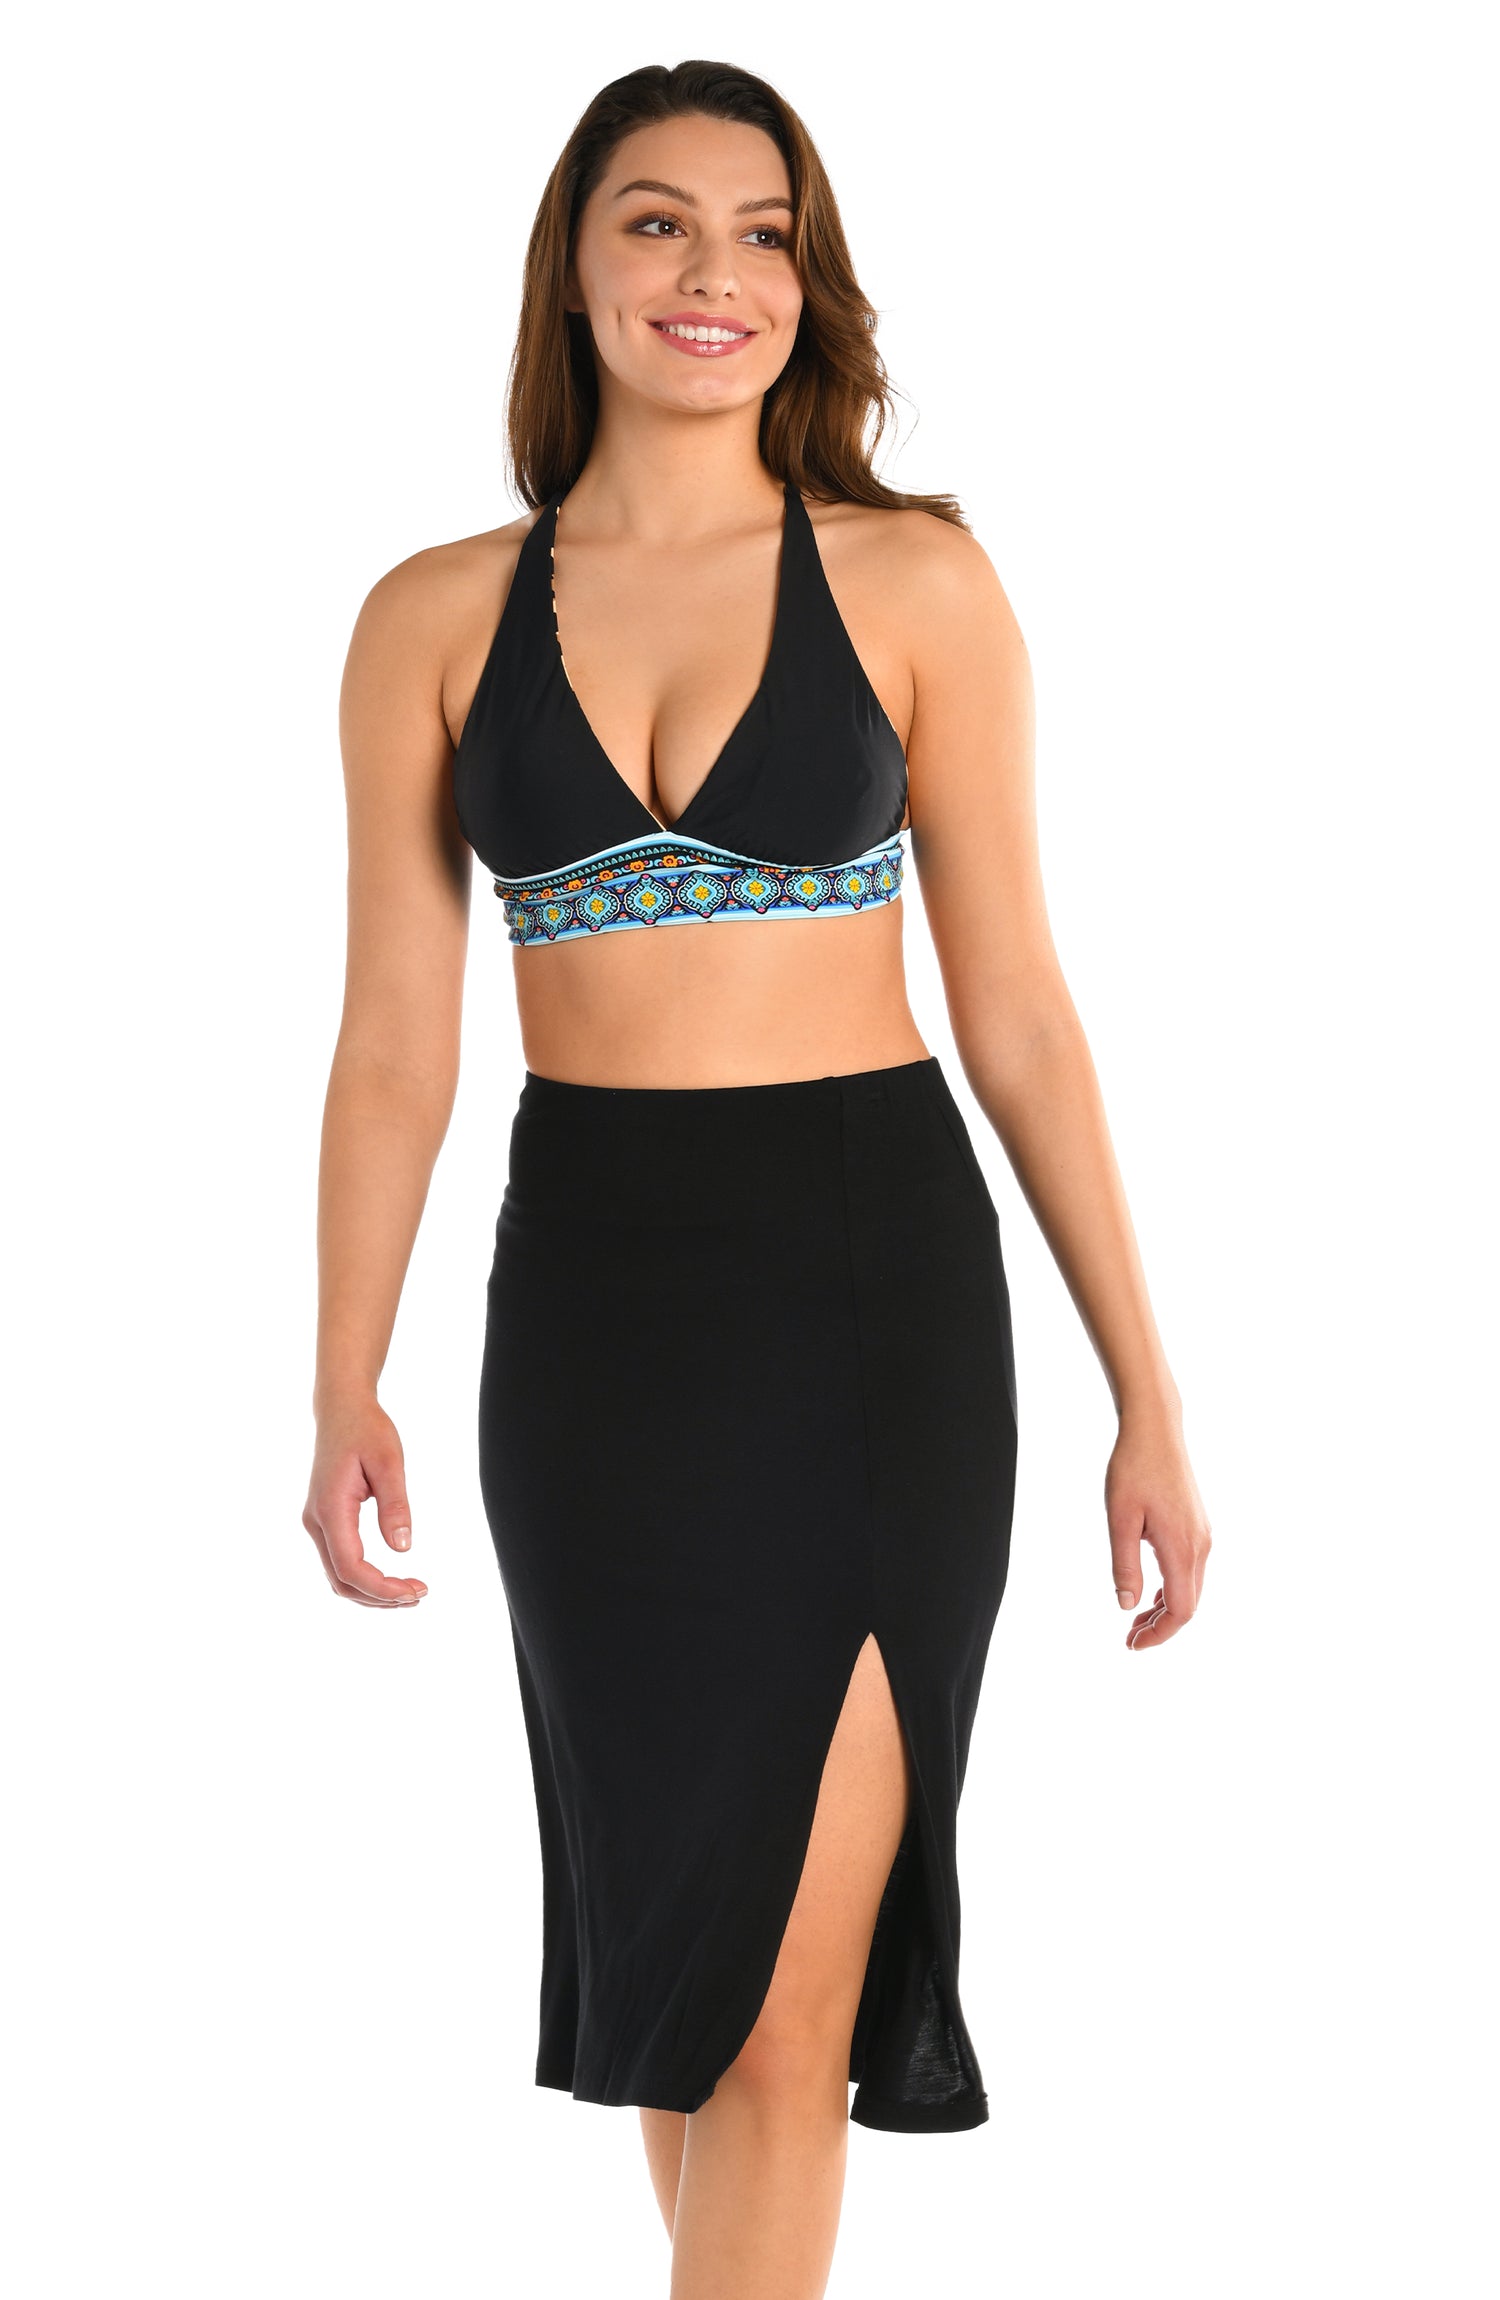 Model is wearing a black midi skirt swimsuit cover up from our Draped Darling collection.